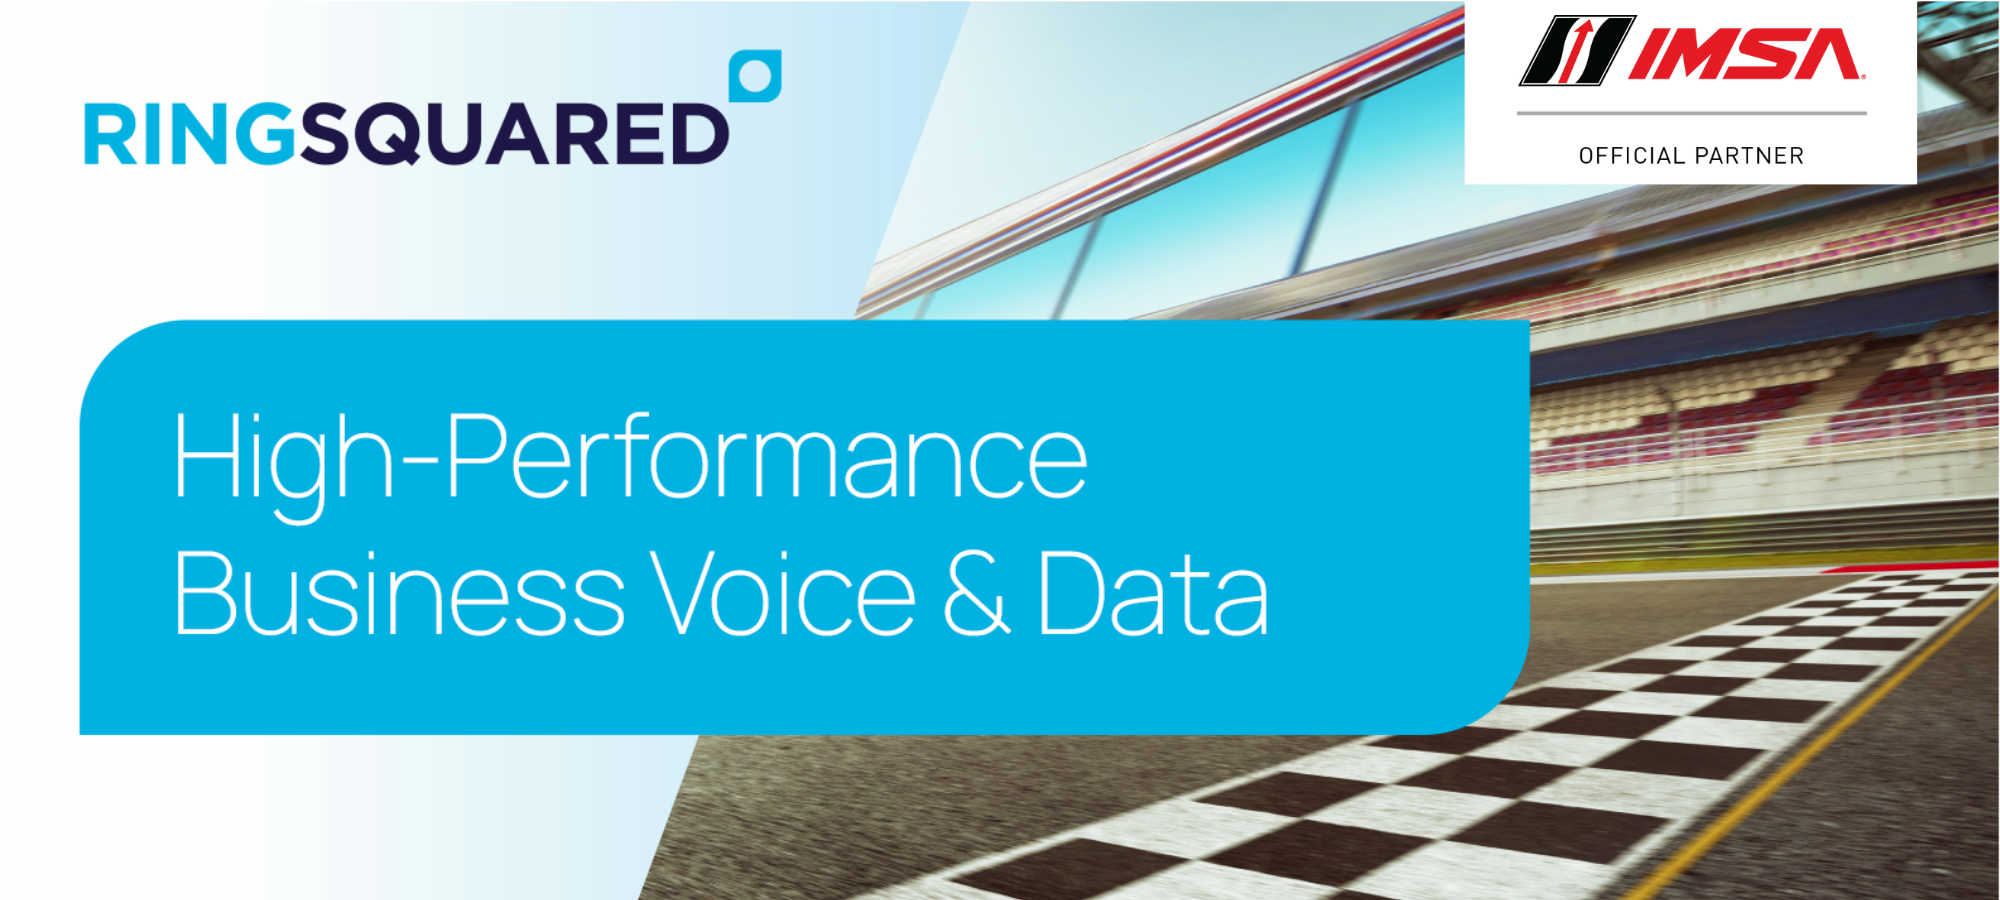 RingSquared High-Performance Business Voice & Data